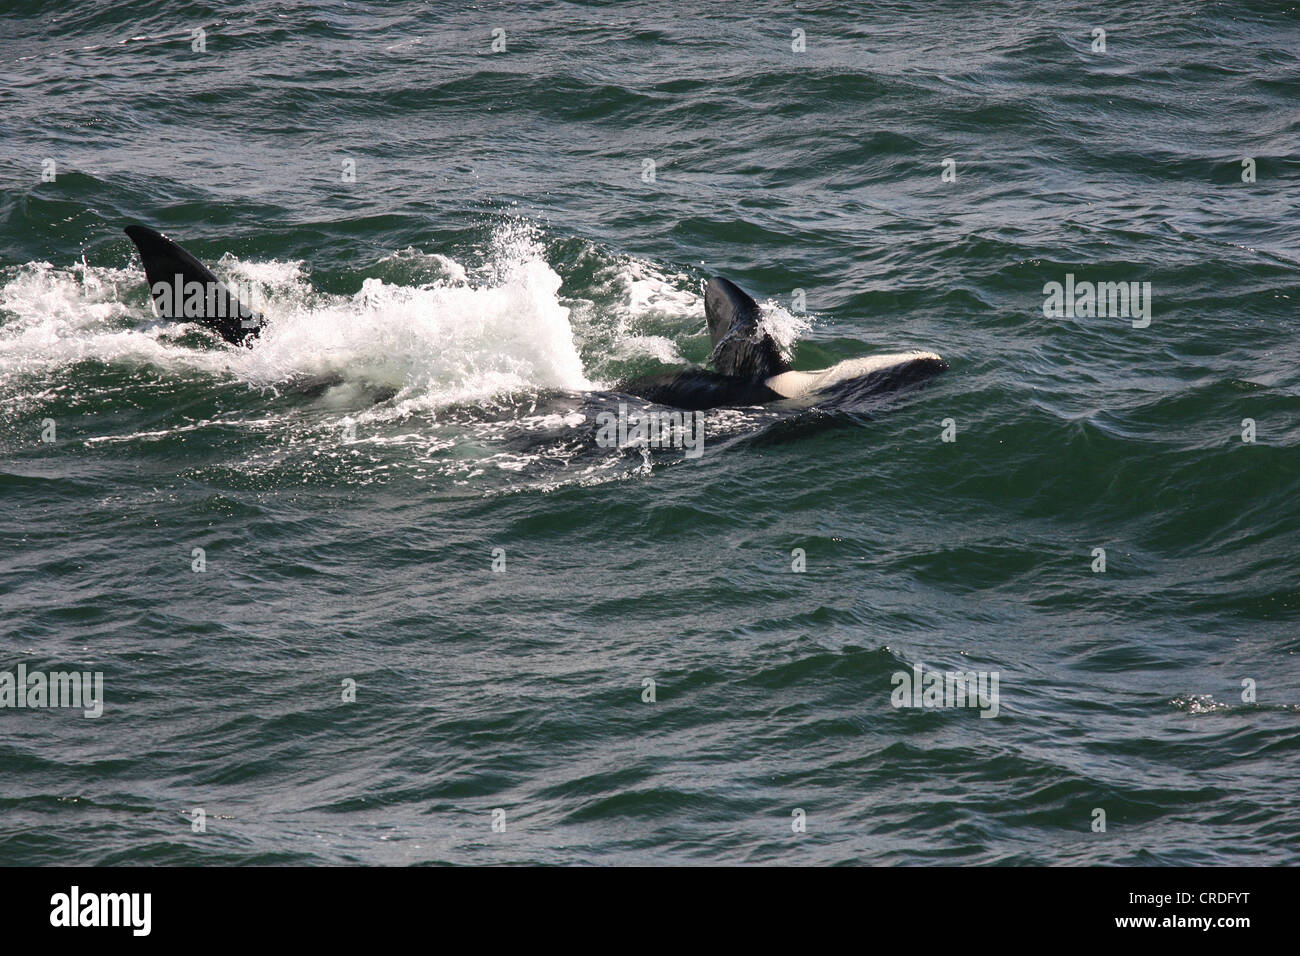 Two killer whales, one on its back and about to give a tail slap, Swanson Channel west of Pender Island, BC Stock Photo